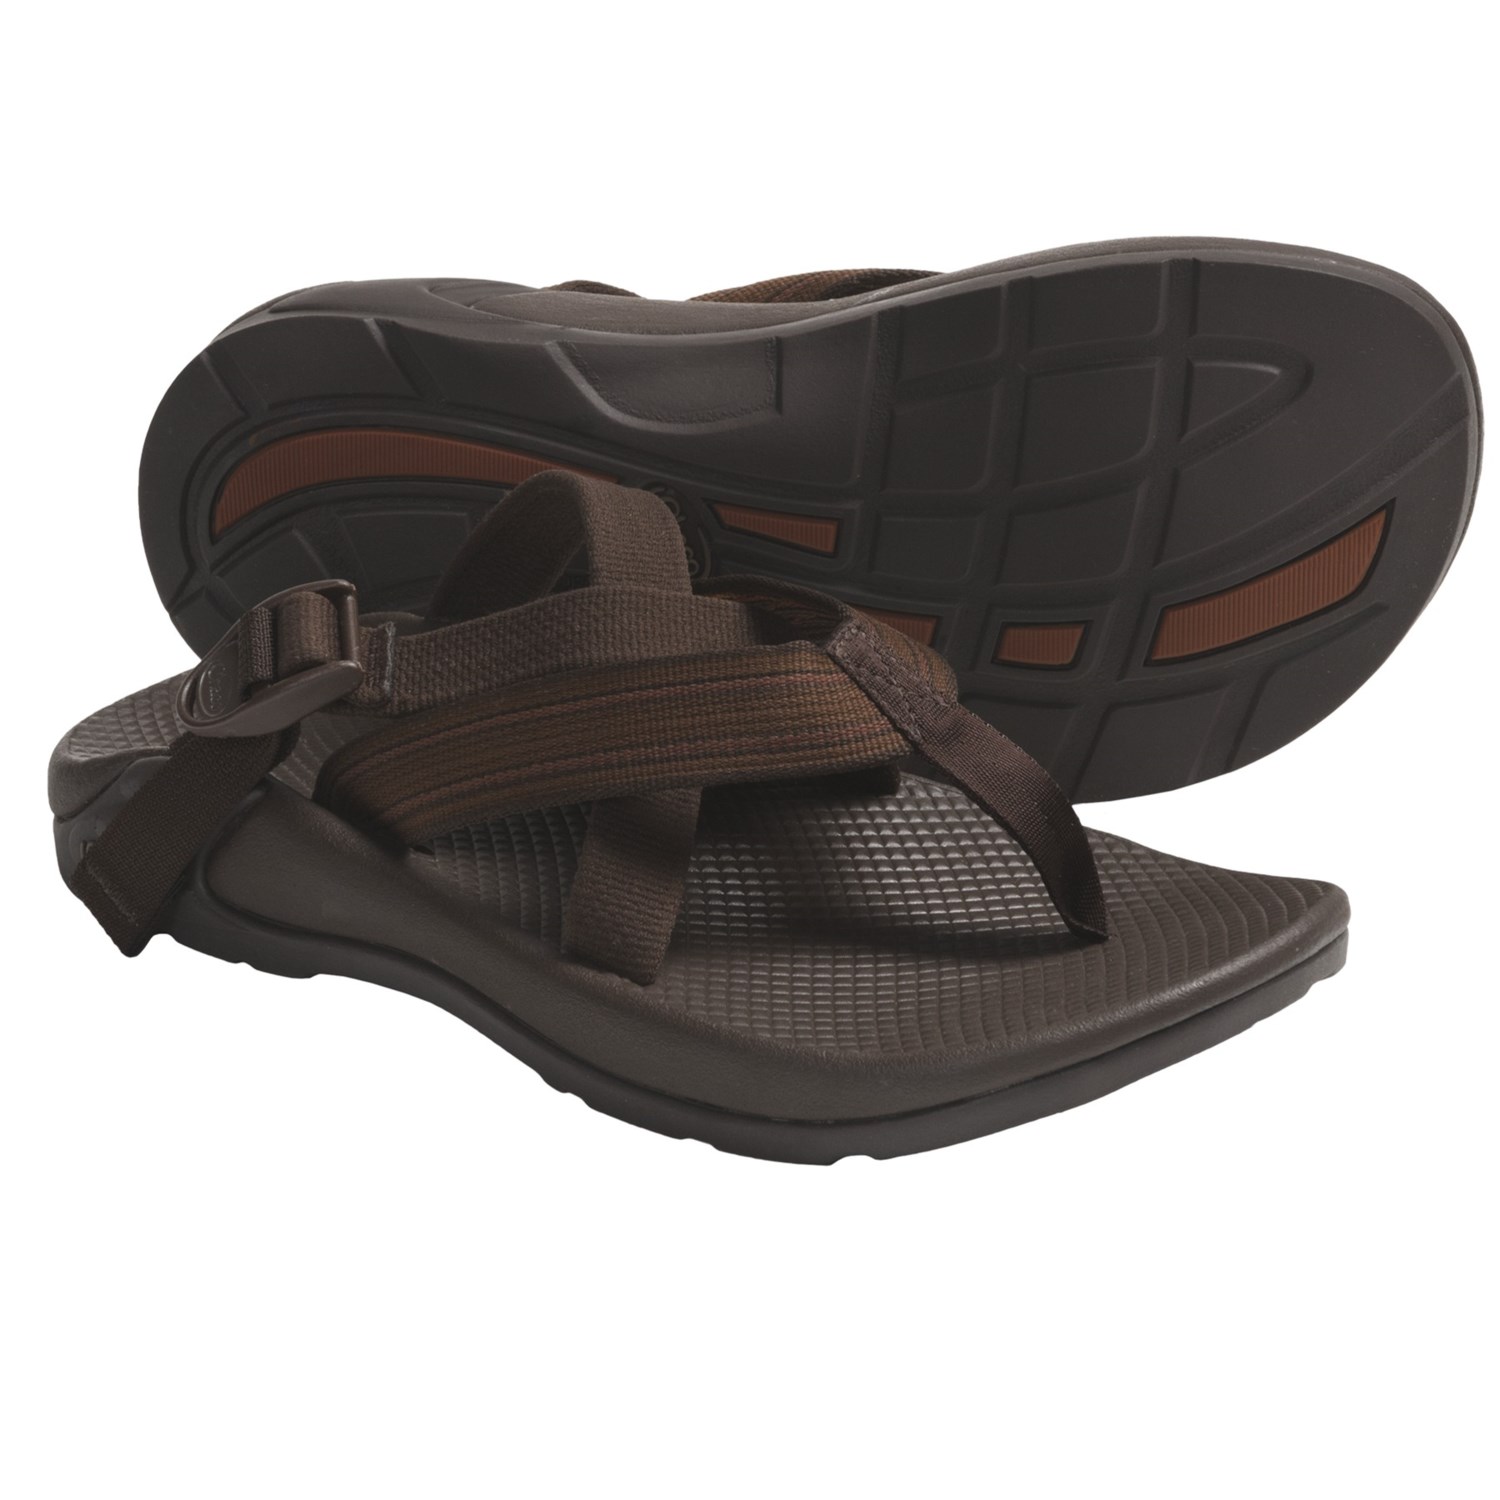 ... about Chaco Hipthong Two EcoTread Sport Sandals For Men - Size 14